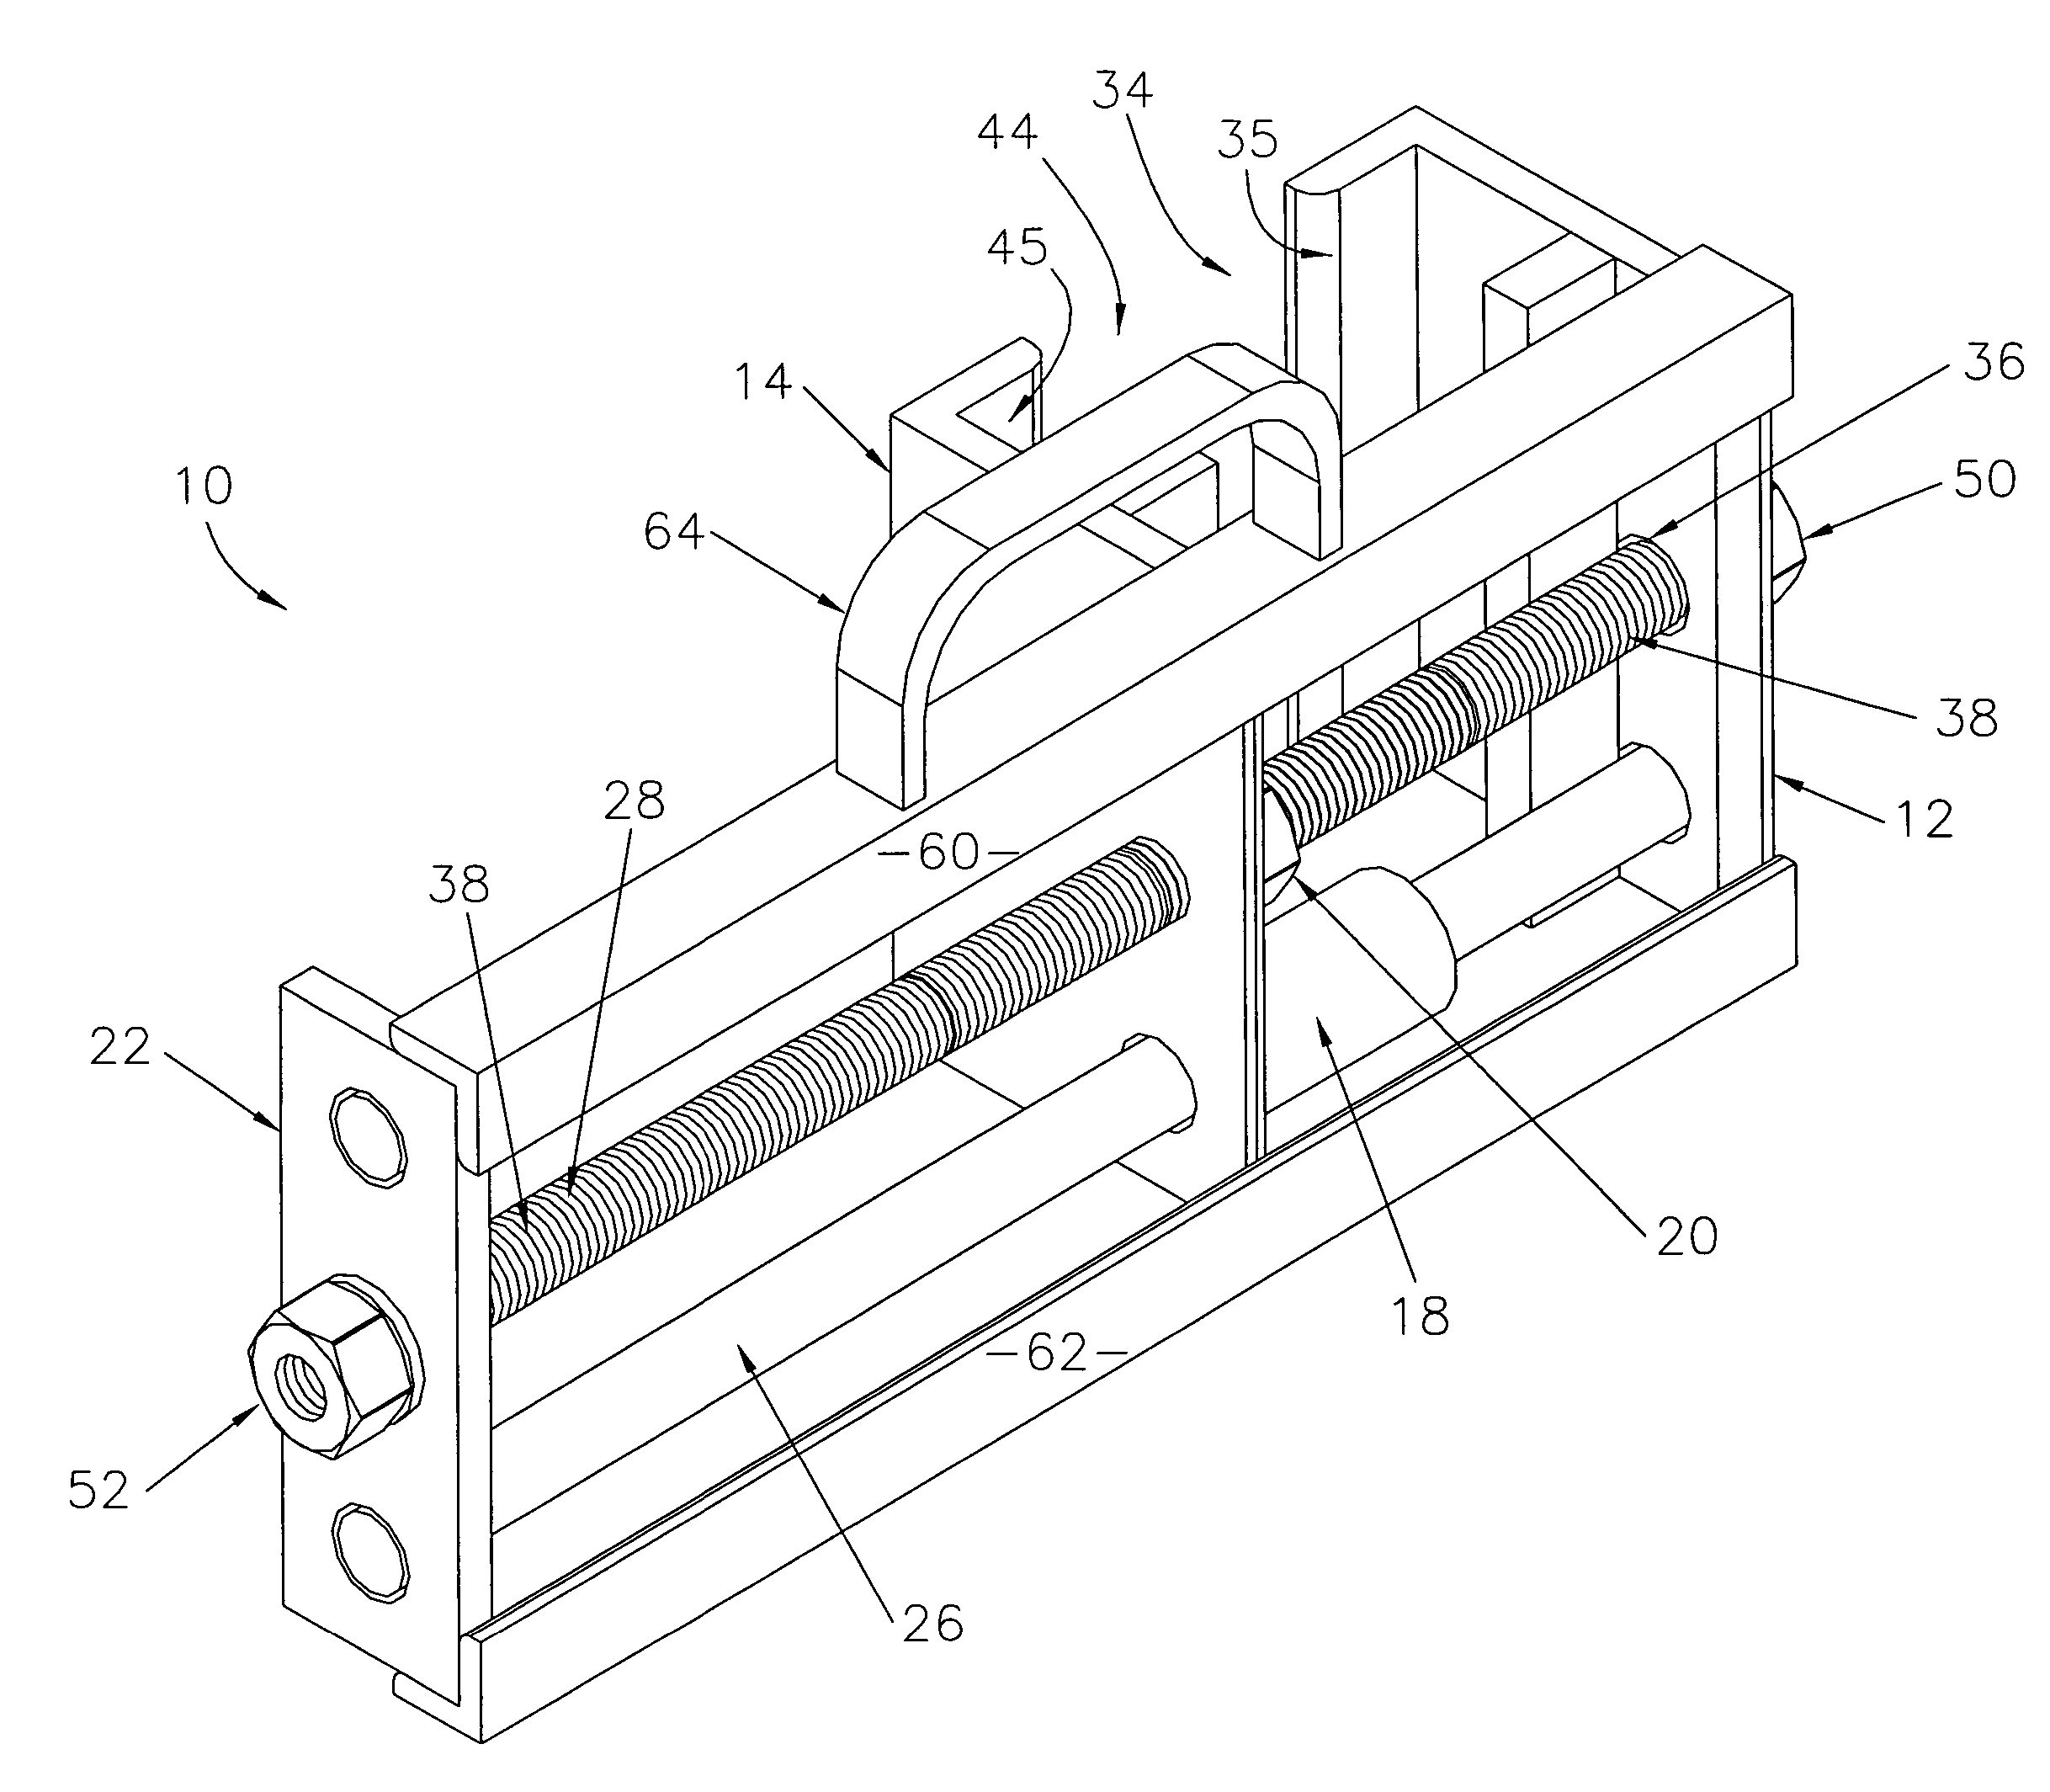 Device for facilitating connection of terminal ends of vehicle track to form closed loop